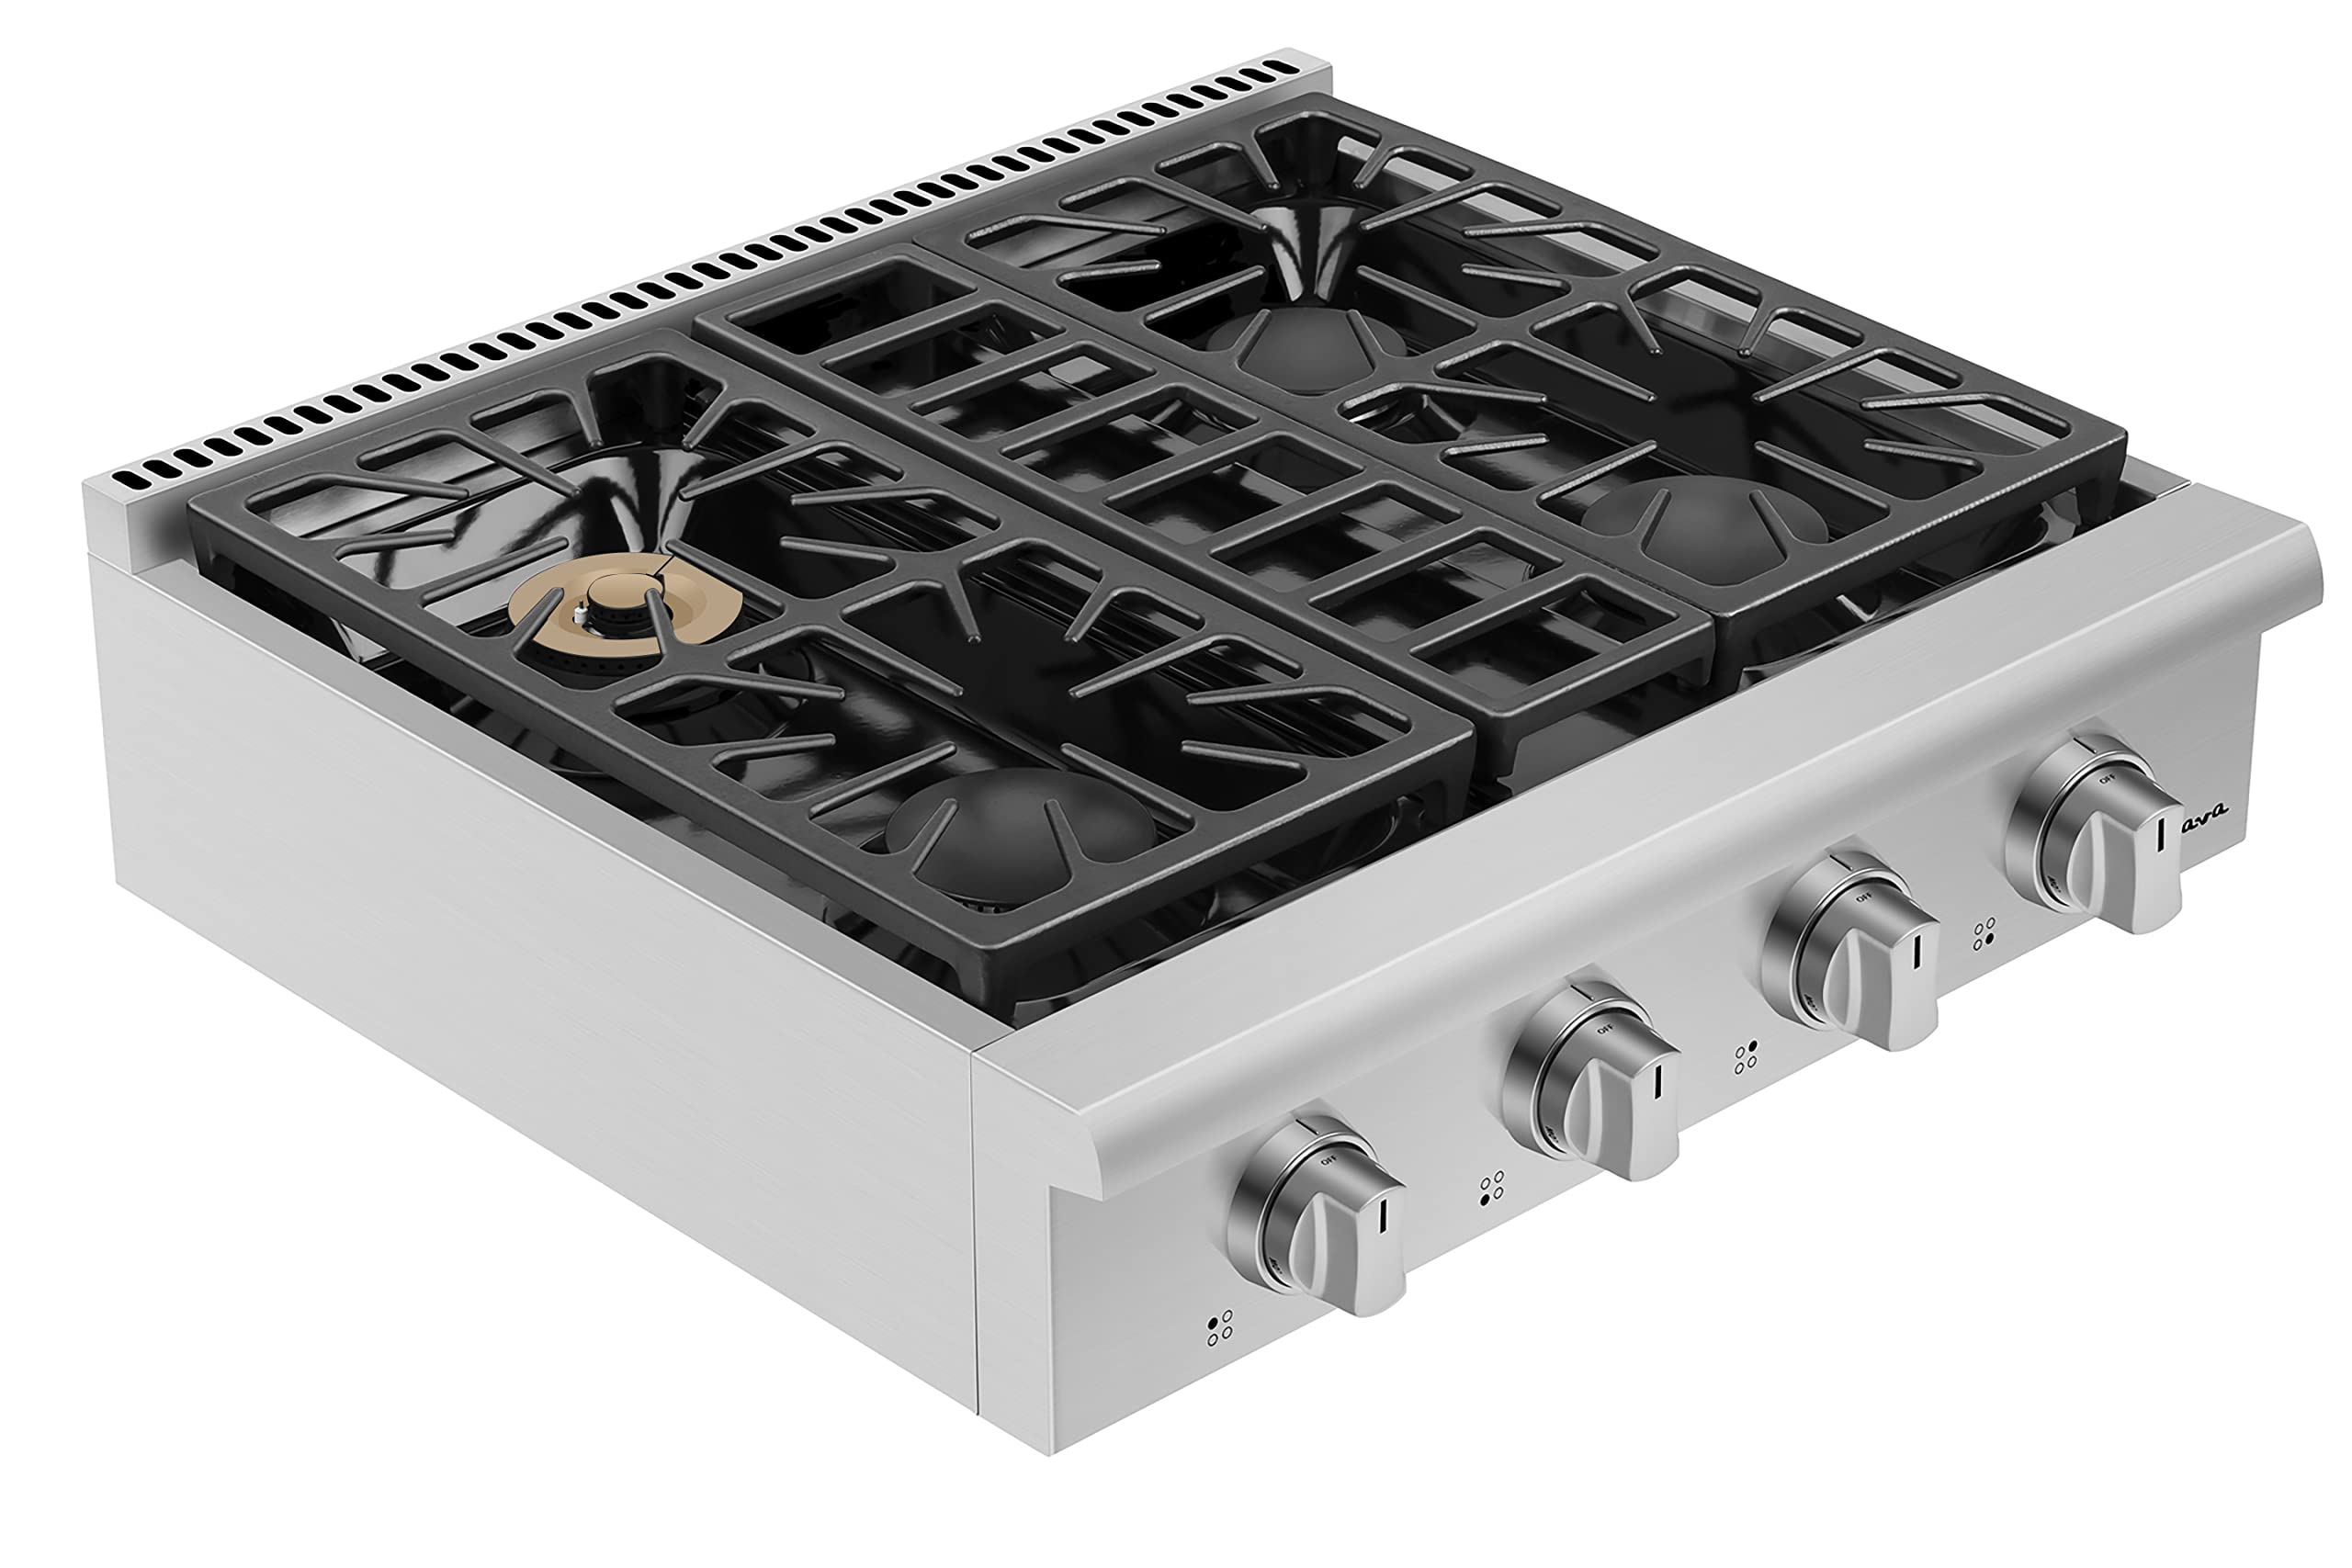 Empava 30 in. Slide-in Natural Gas Rangetop with 4 Burners in Stainless Steel, 30GC30